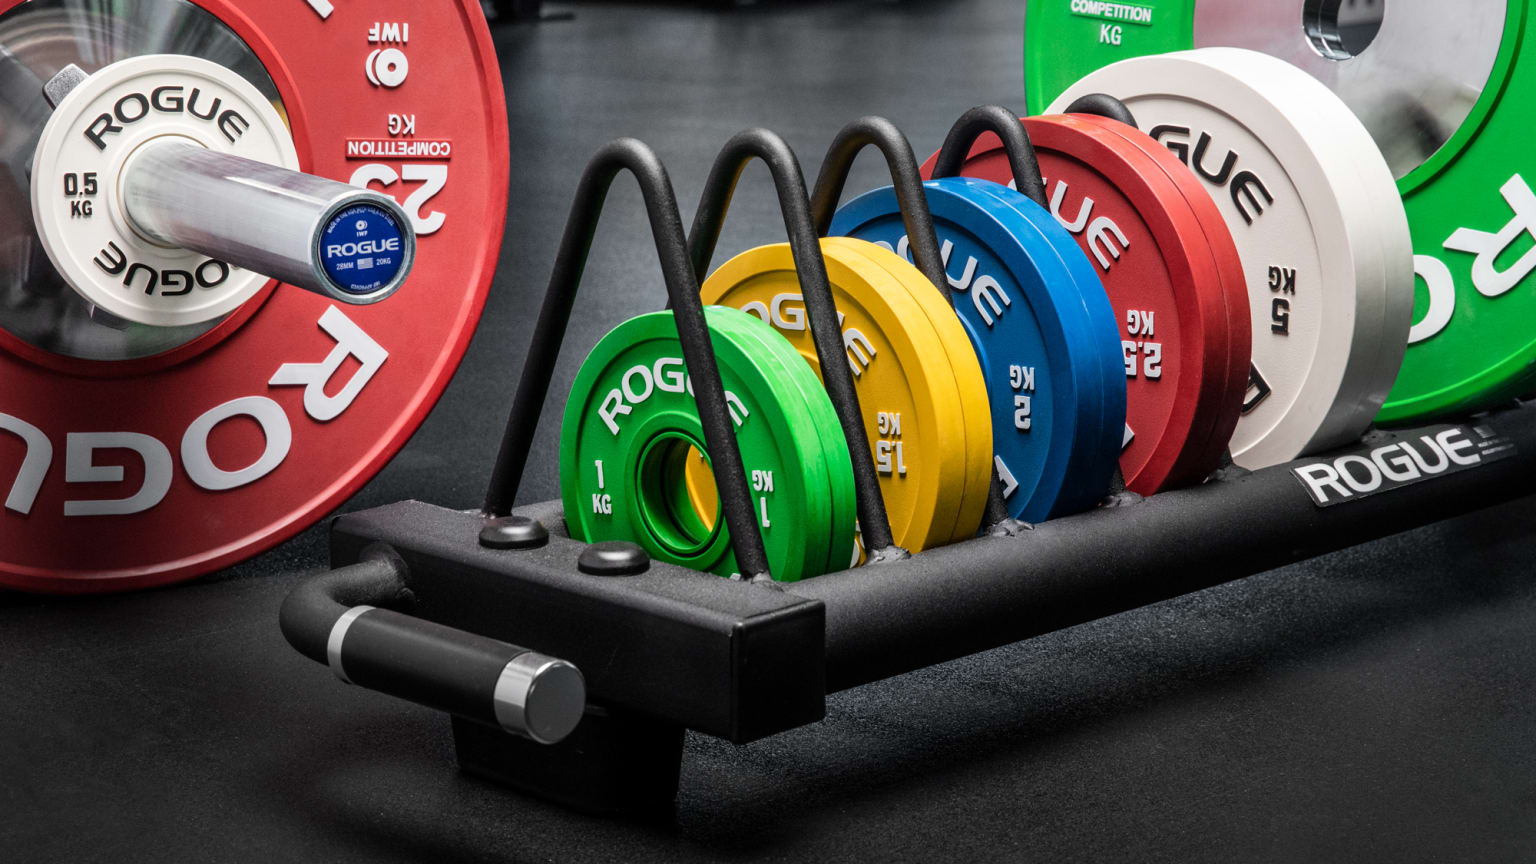 Athletes happy as IWF removes undergarments from weightlifting weigh-in  rules